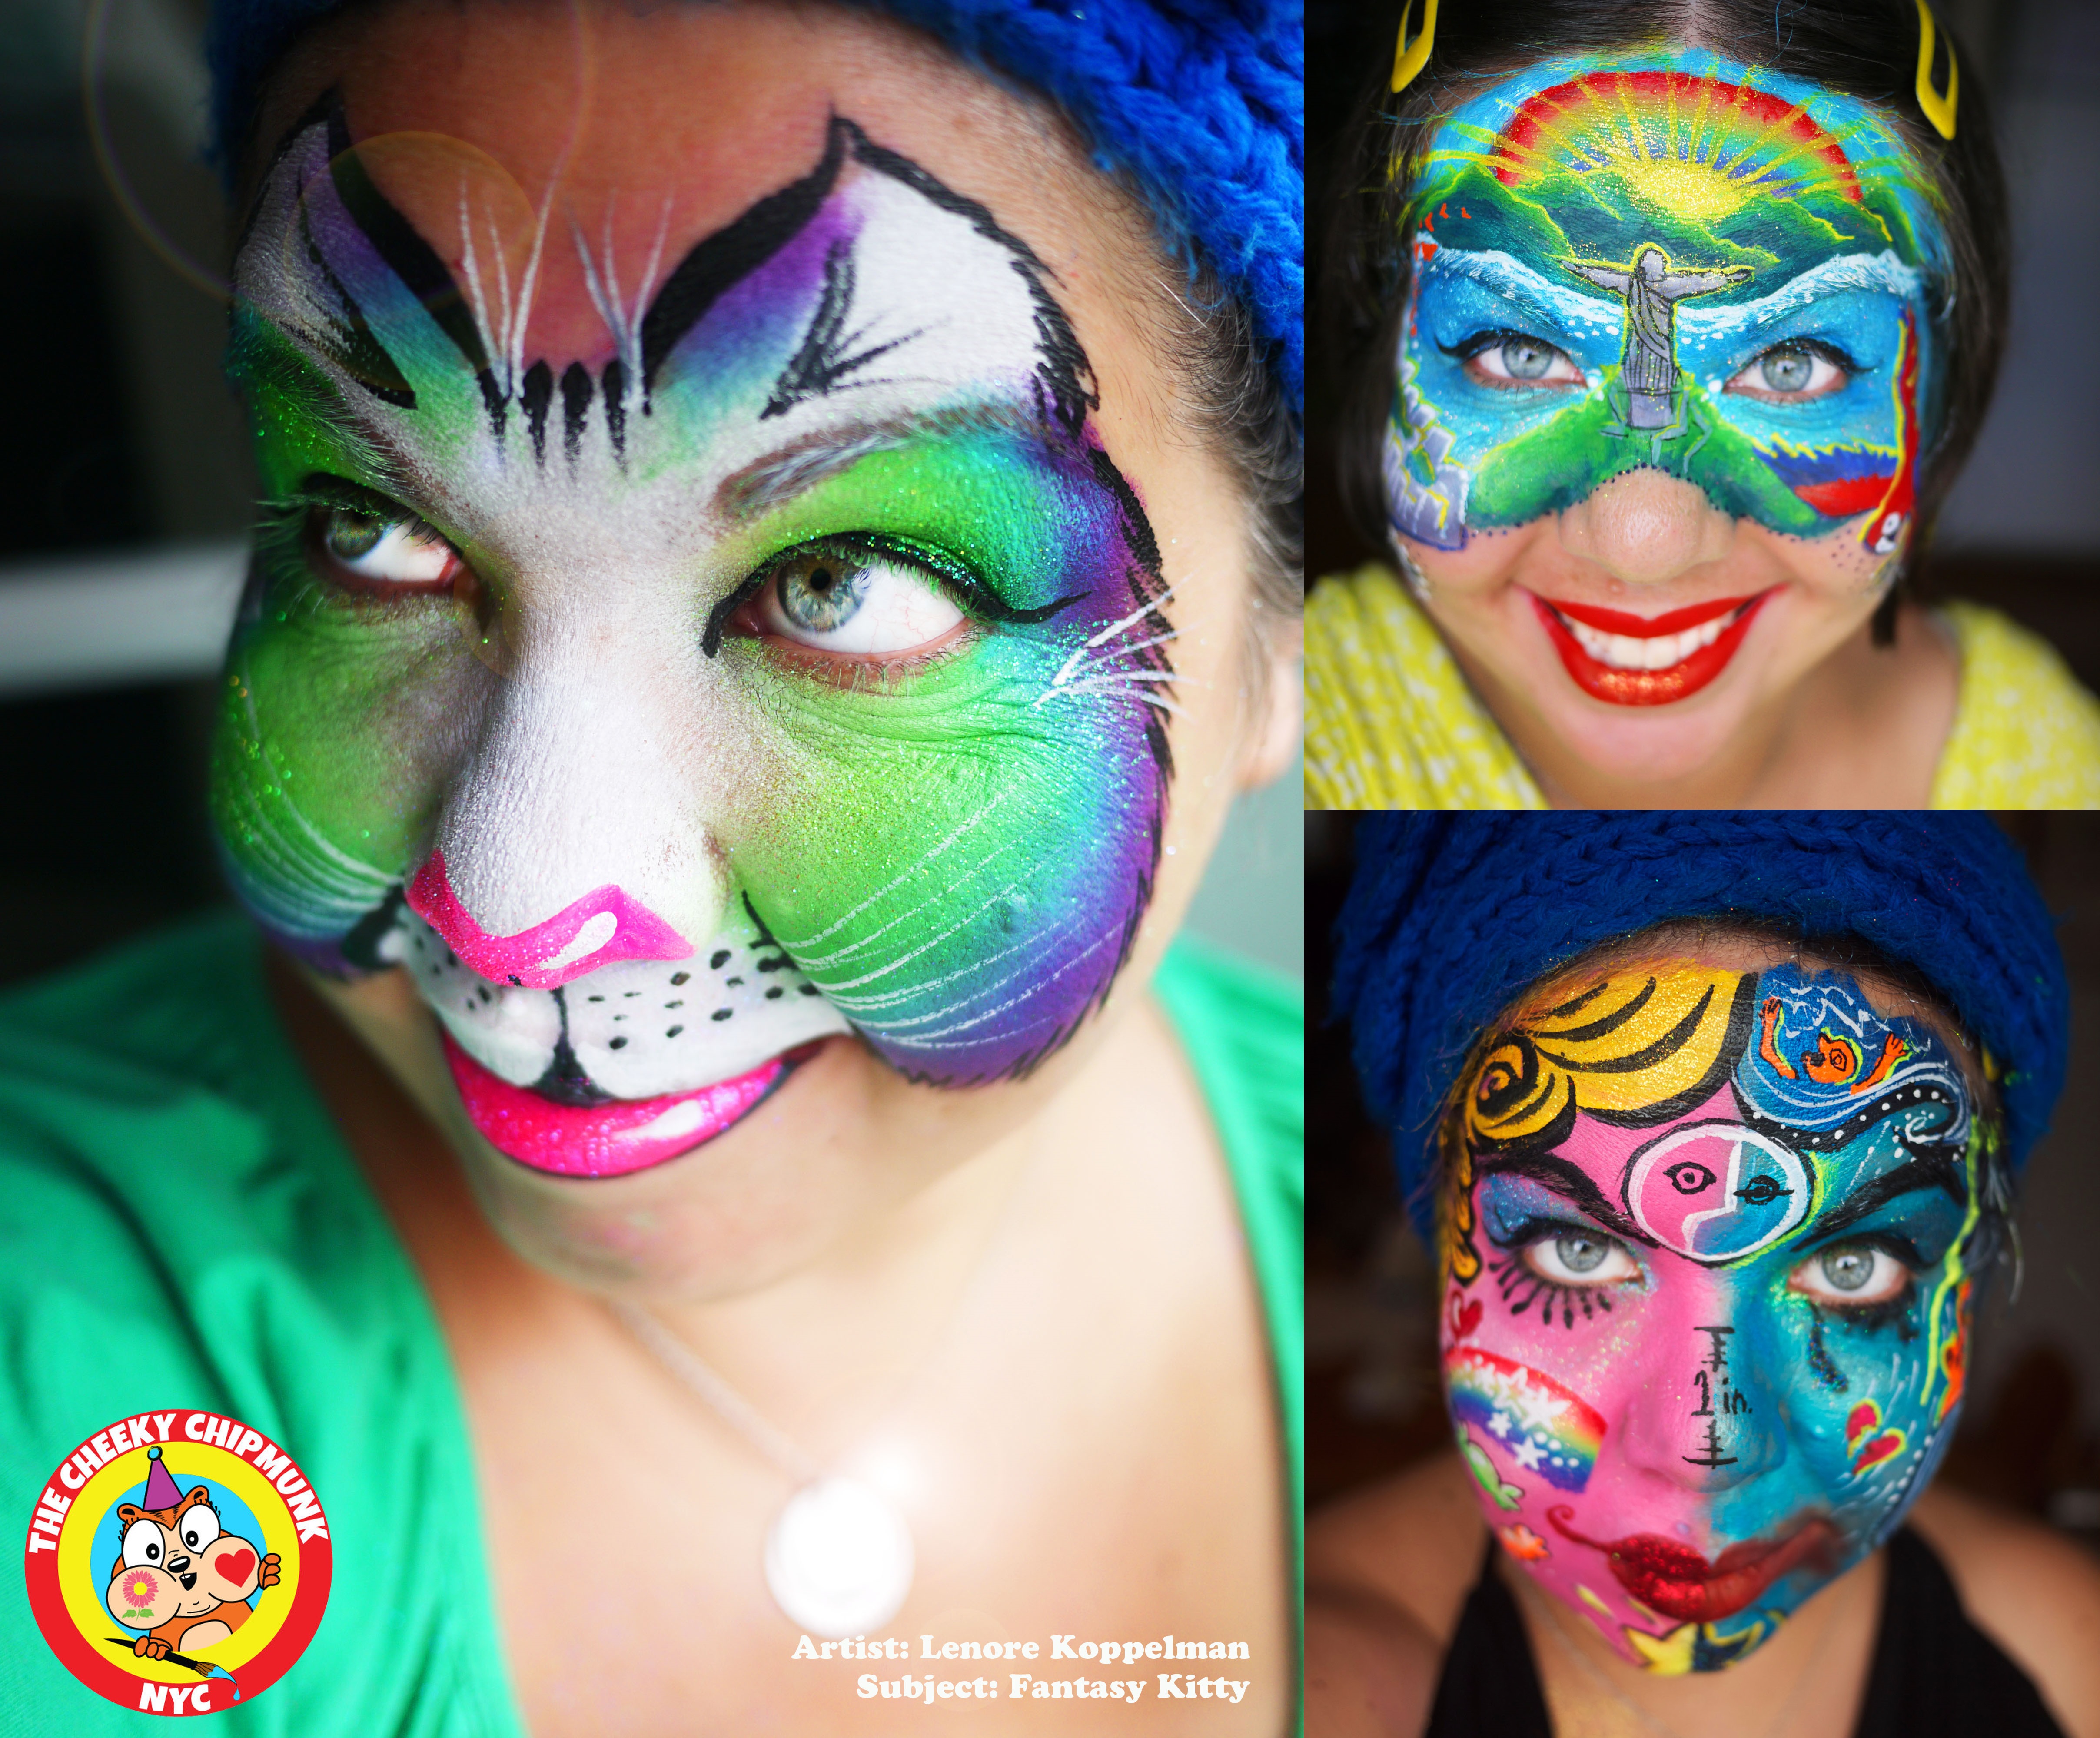 Astoria Face And Body Painter Brings Out Inner Child With Colorful